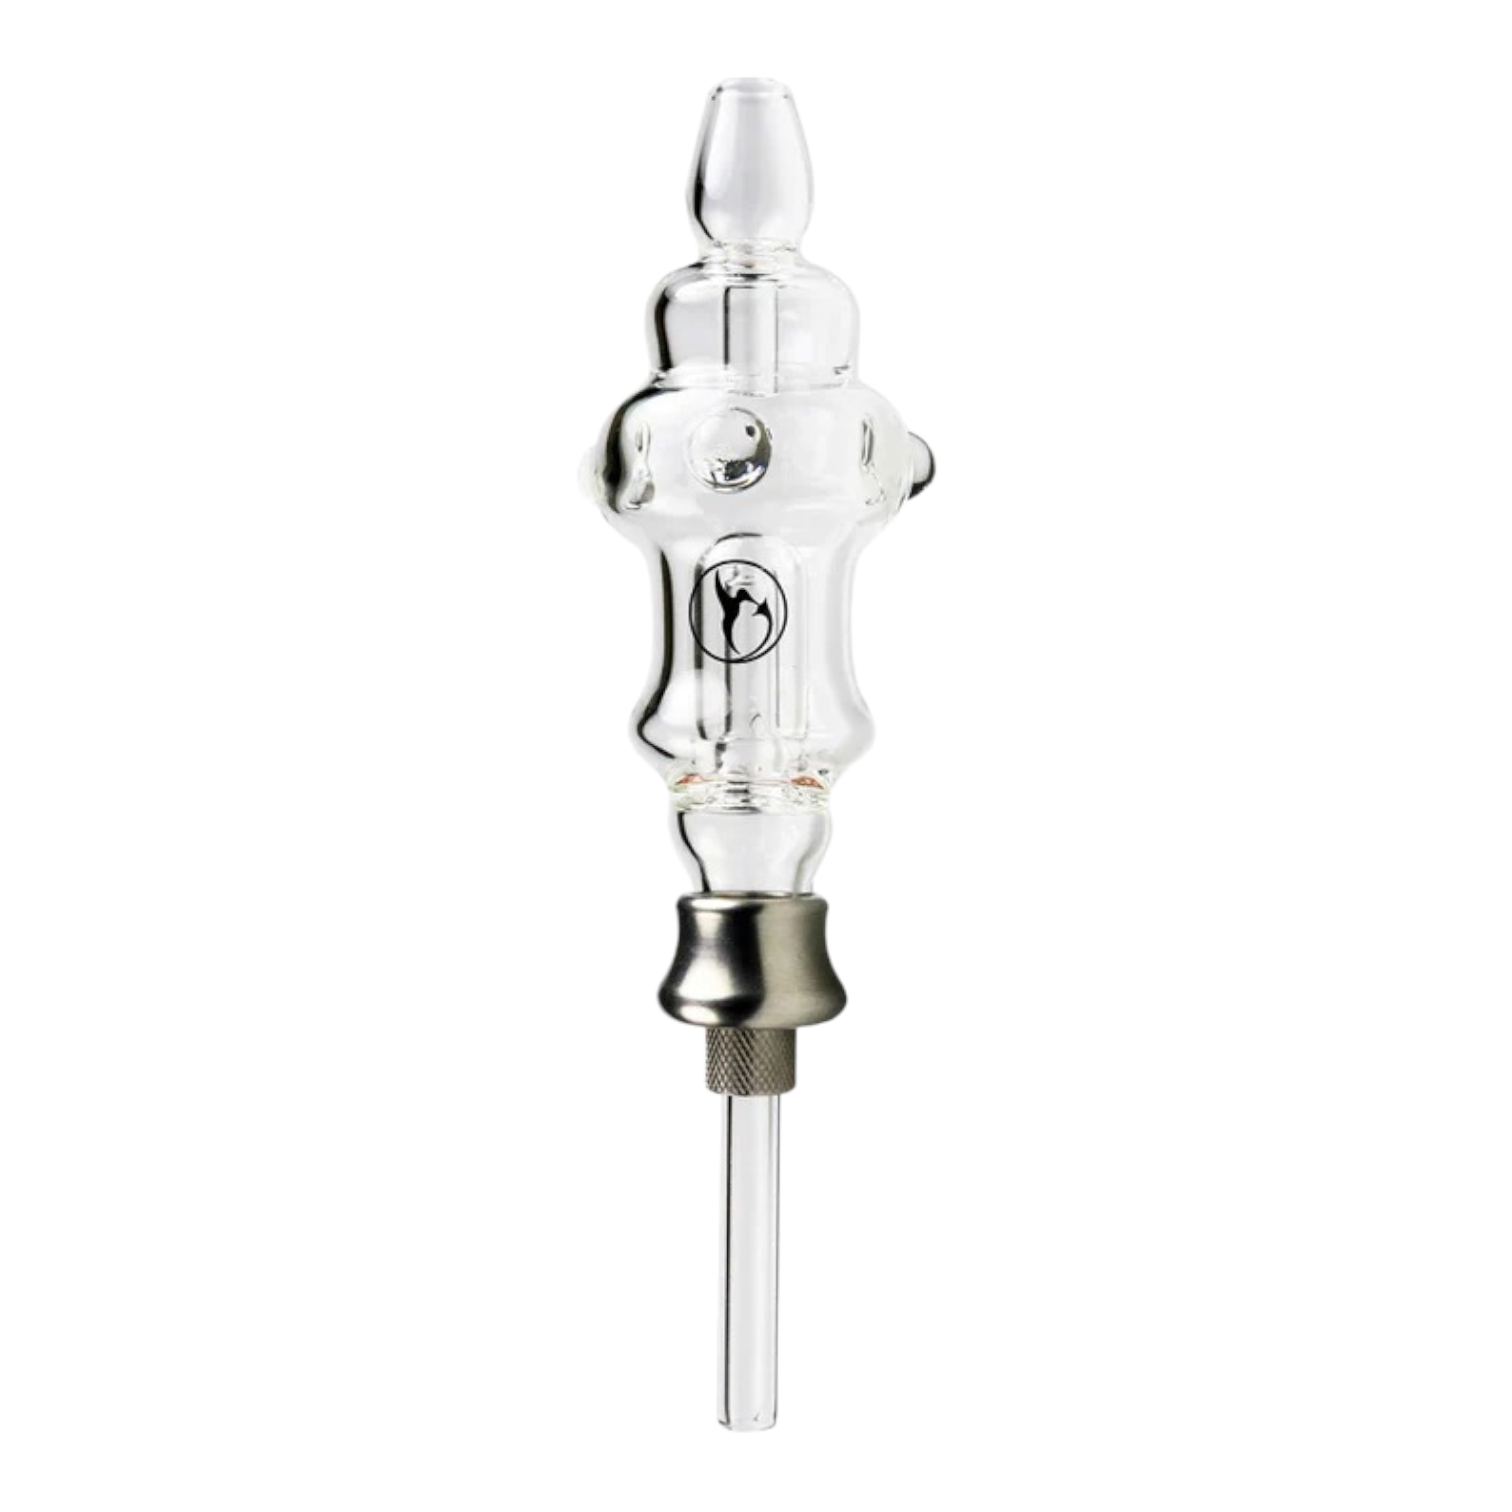 The Micro – Glass Nectar Collector Kit